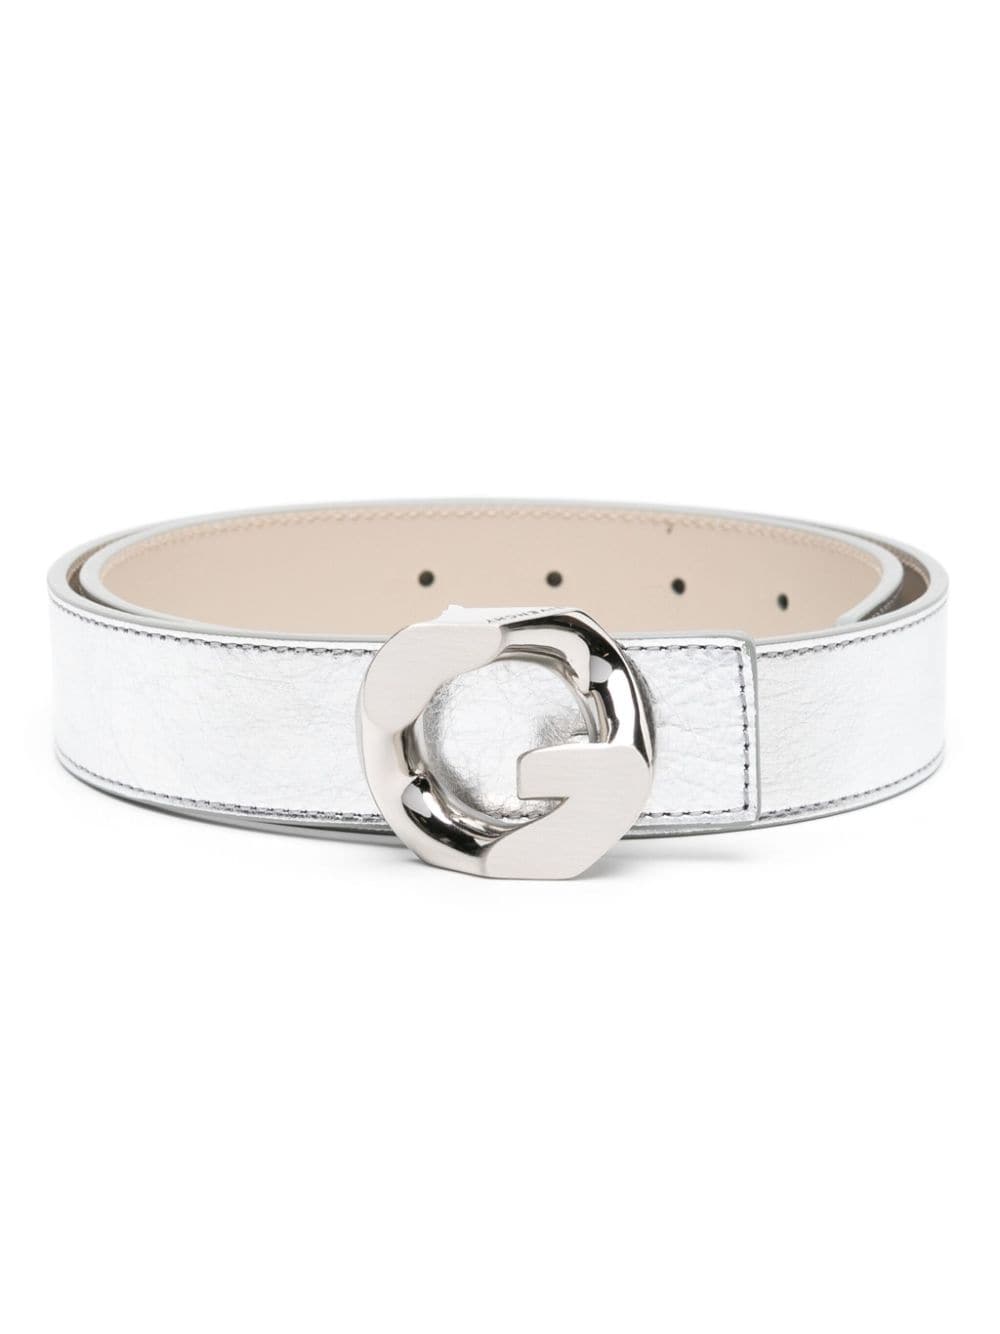 Givenchy G-chain Buckle Leather Belt In Silver